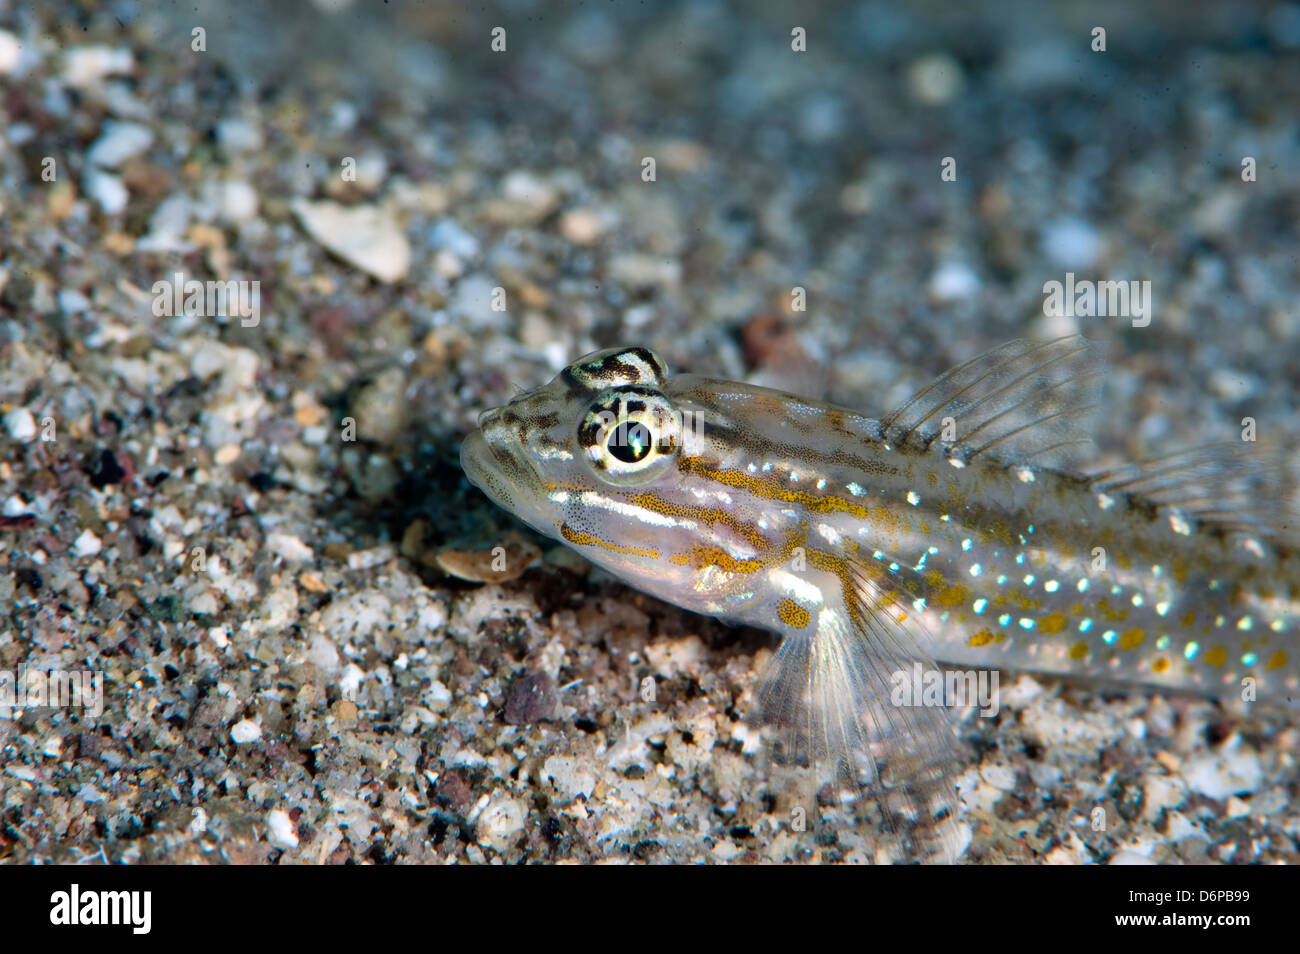 Bridled goby (Coryphopterus glaucofraenum), Dominica, West Indies, Caribbean, Central America Stock Photo